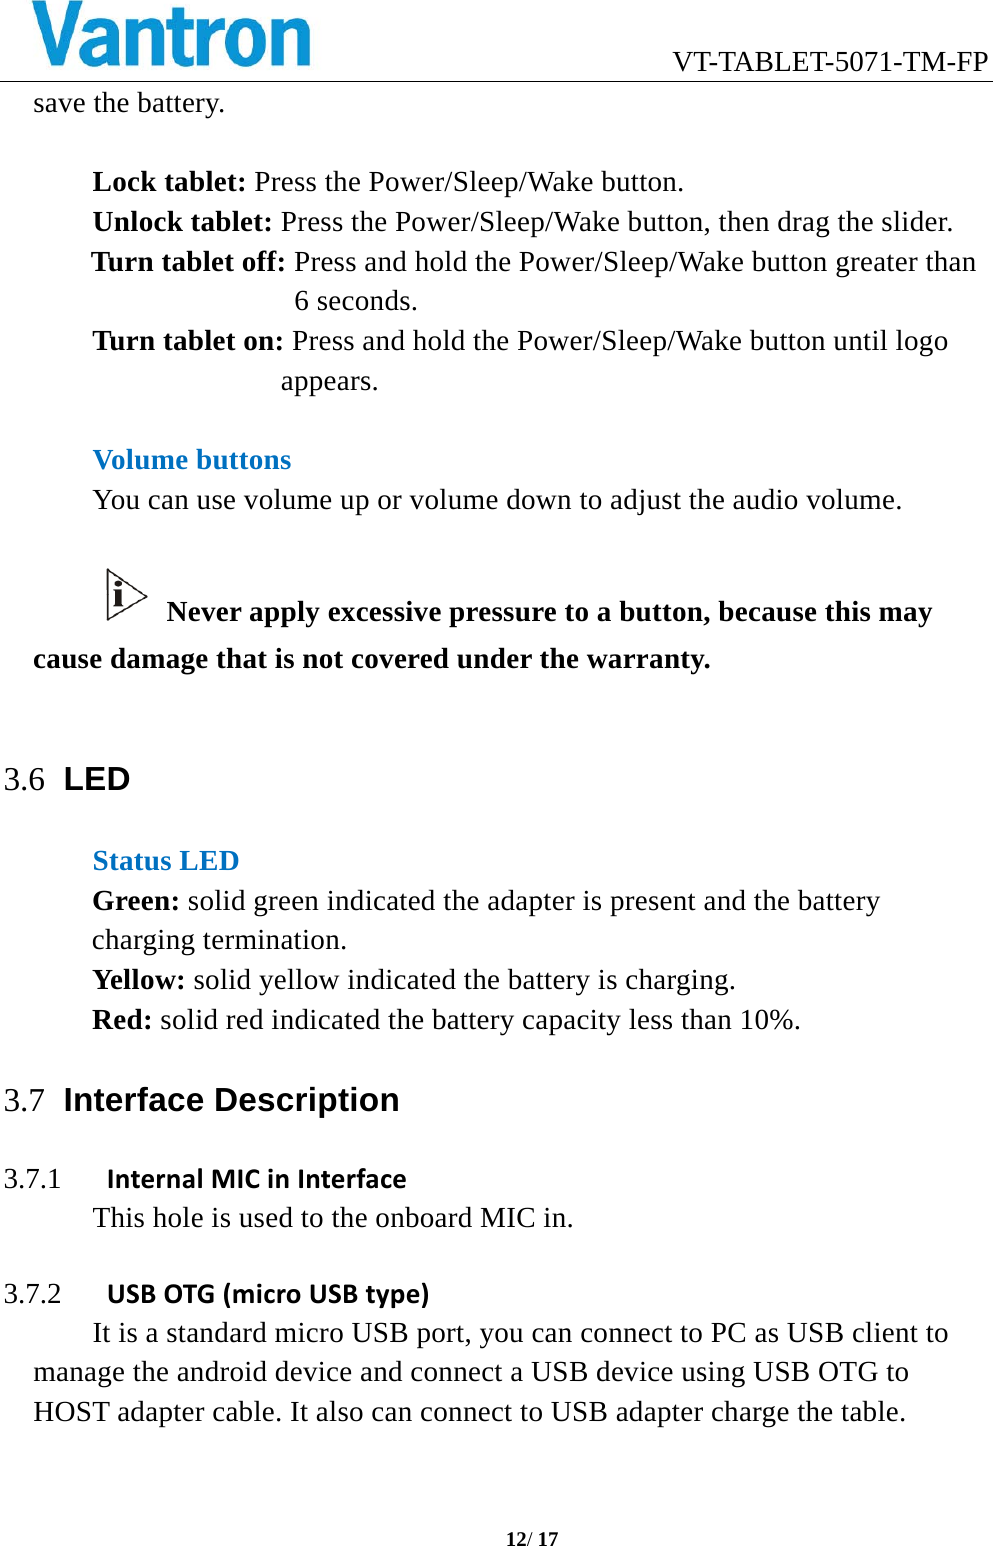                            VT-TABLET-5071-TM-FP  12/ 17  save the battery.  Lock tablet: Press the Power/Sleep/Wake button. Unlock tablet: Press the Power/Sleep/Wake button, then drag the slider. Turn tablet off: Press and hold the Power/Sleep/Wake button greater than 6 seconds. Turn tablet on: Press and hold the Power/Sleep/Wake button until logo appears.  Volume buttons You can use volume up or volume down to adjust the audio volume.   Never apply excessive pressure to a button, because this may cause damage that is not covered under the warranty.  3.6 LED Status LED Green: solid green indicated the adapter is present and the battery charging termination. Yellow: solid yellow indicated the battery is charging. Red: solid red indicated the battery capacity less than 10%. 3.7 Interface Description 3.7.1 InternalMICinInterfaceThis hole is used to the onboard MIC in.  3.7.2 USBOTG(microUSBtype)It is a standard micro USB port, you can connect to PC as USB client to manage the android device and connect a USB device using USB OTG to HOST adapter cable. It also can connect to USB adapter charge the table.  